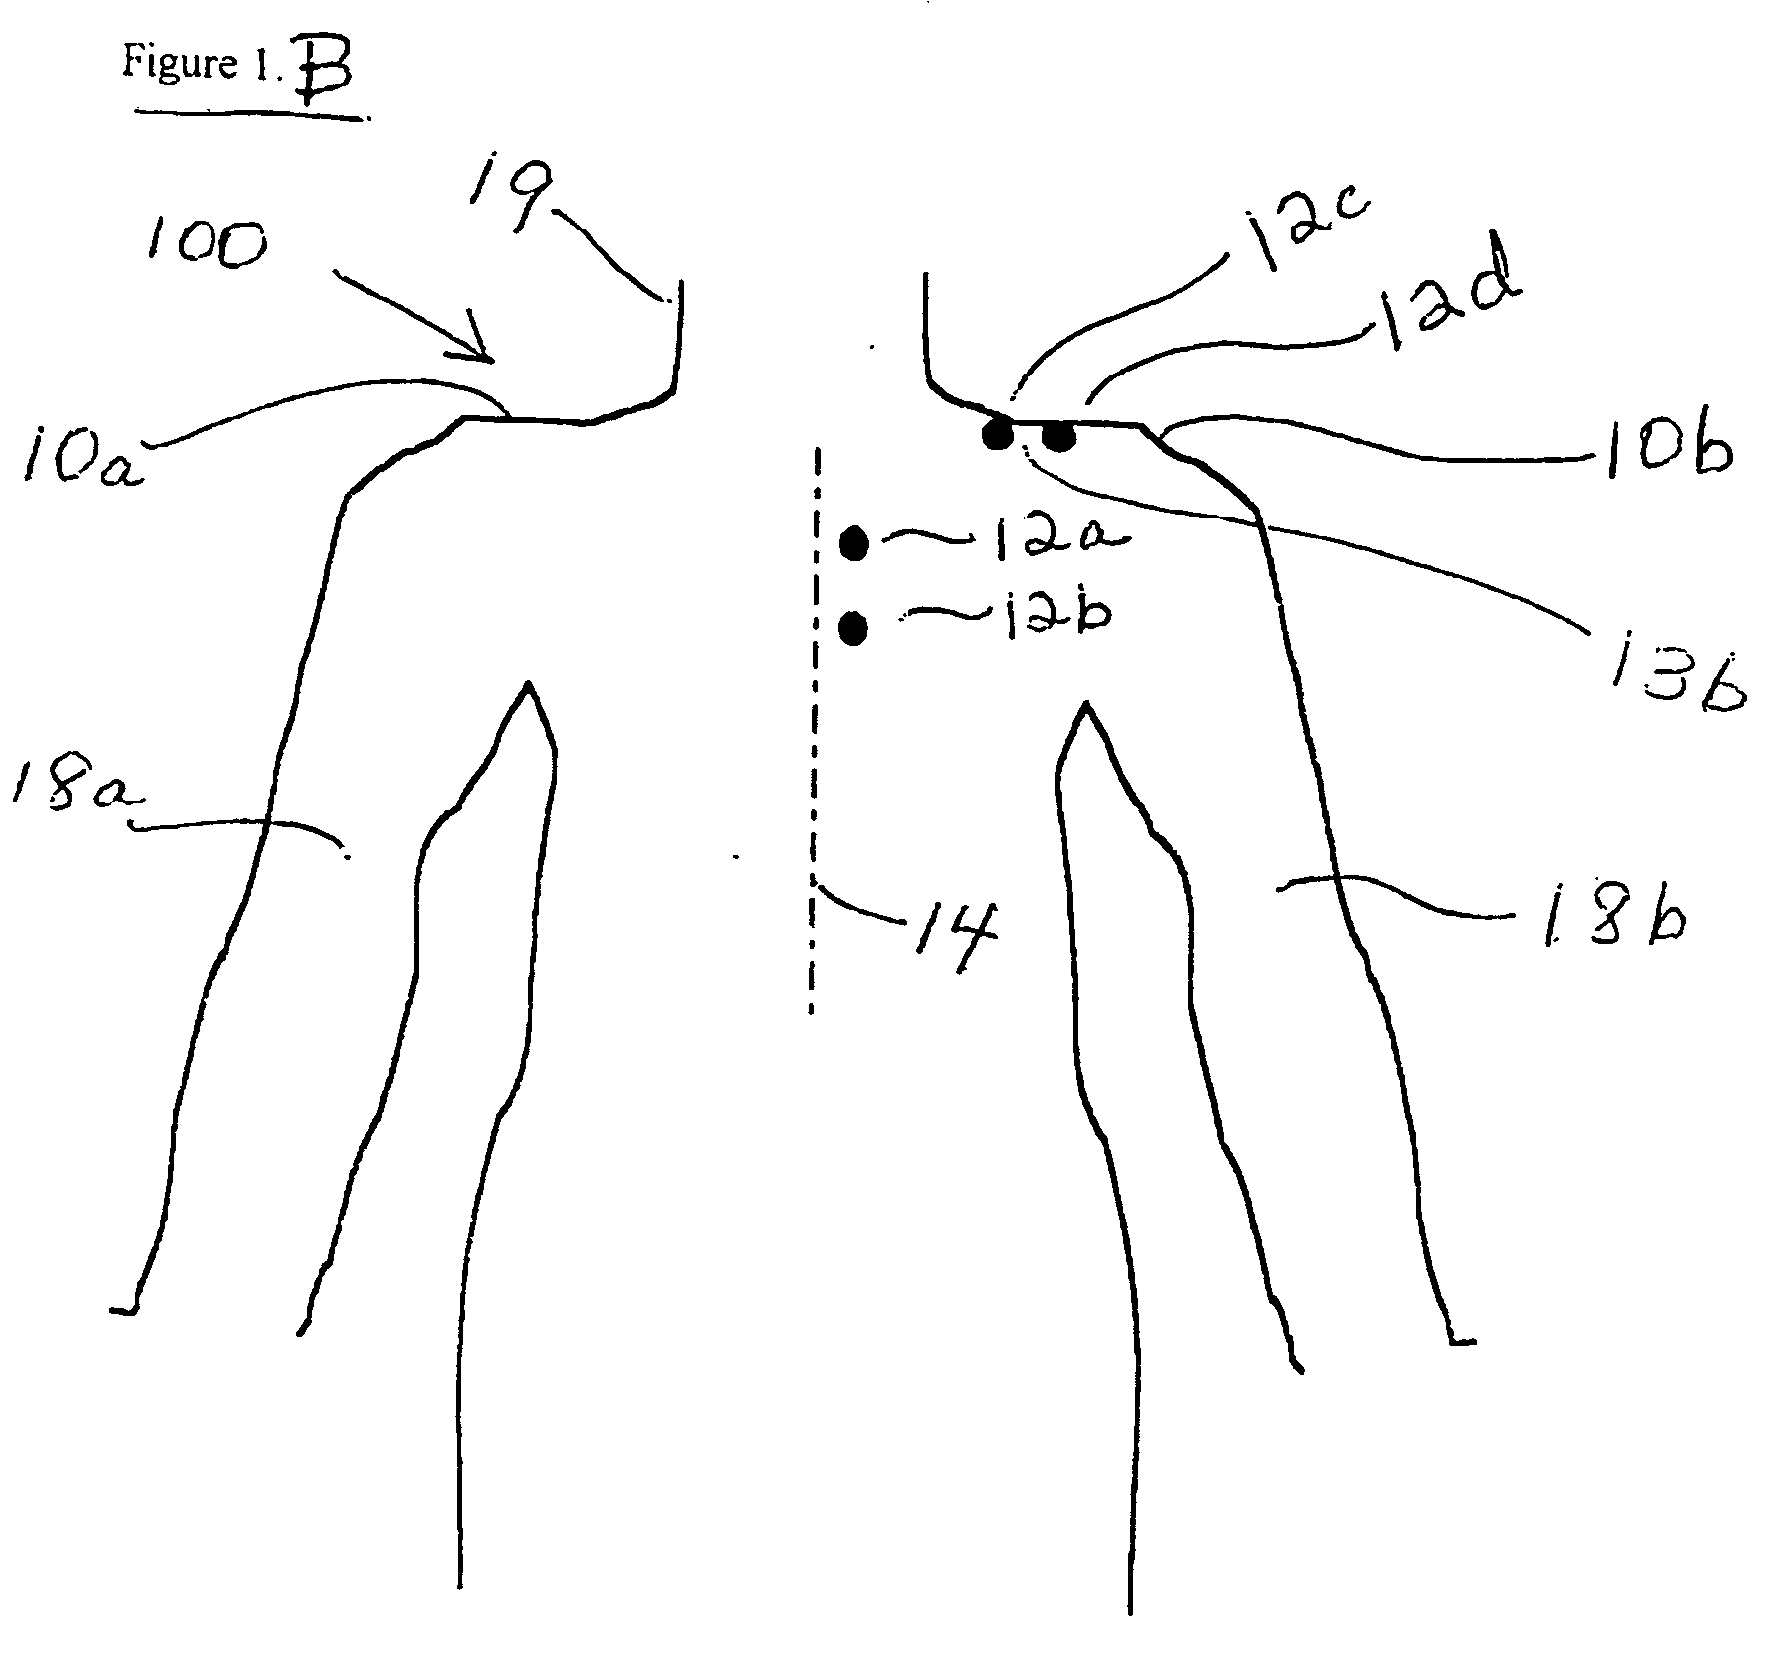 Process for effecting the relaxation of muscles of a human by means of fragrance